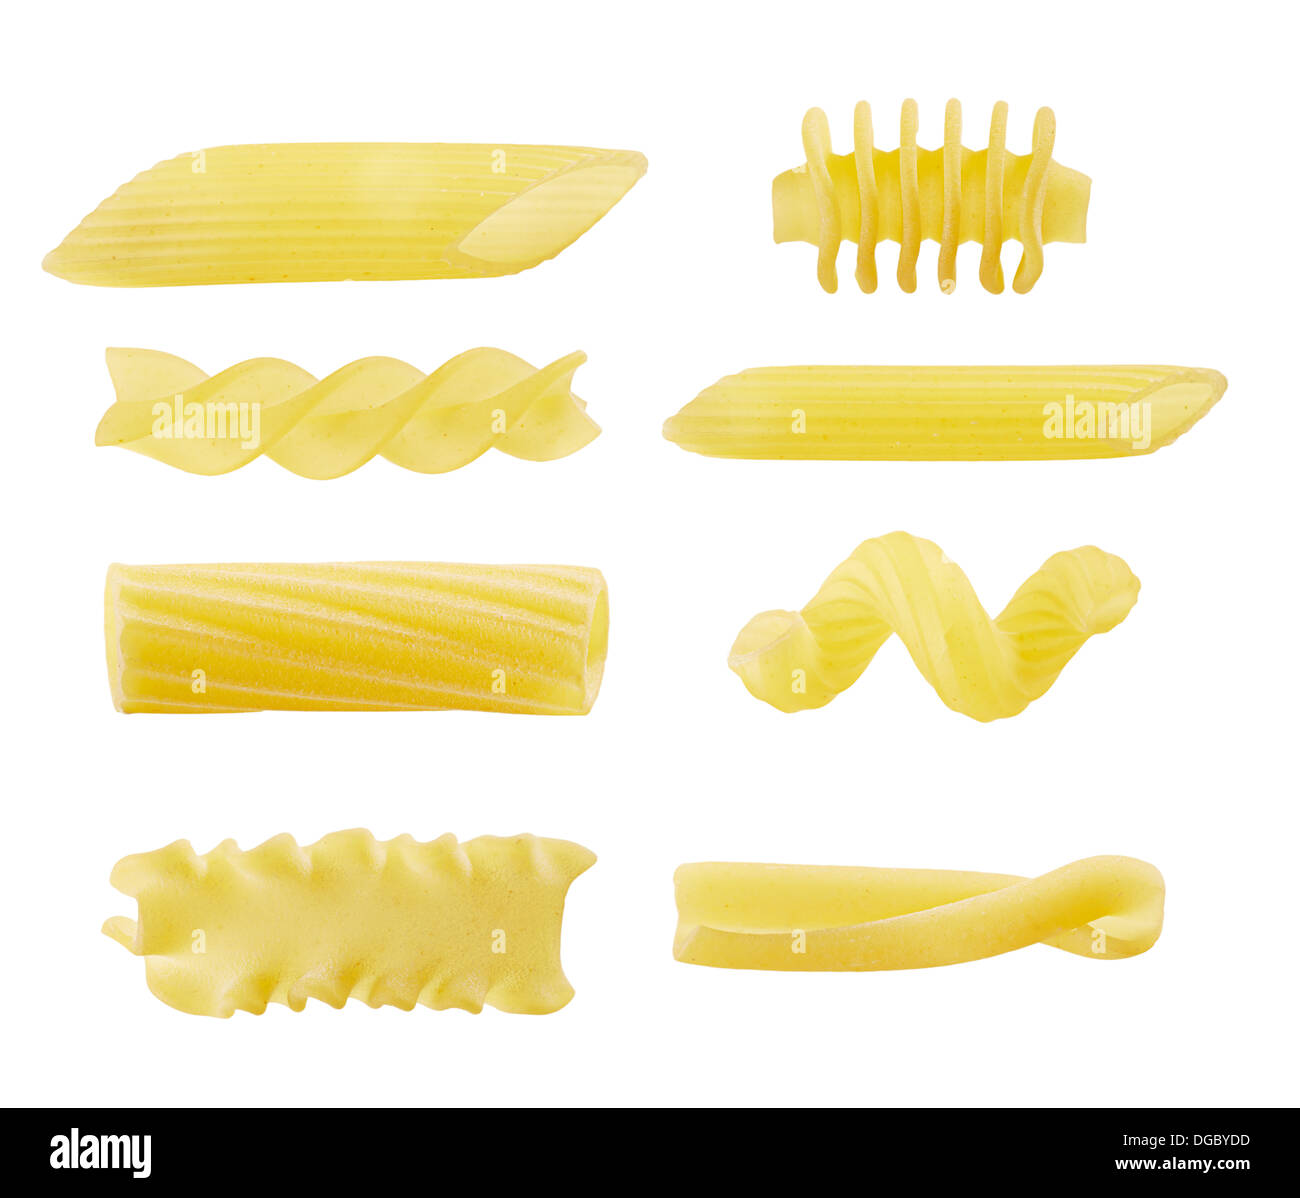 Eight different types of pasta on white background Stock Photo